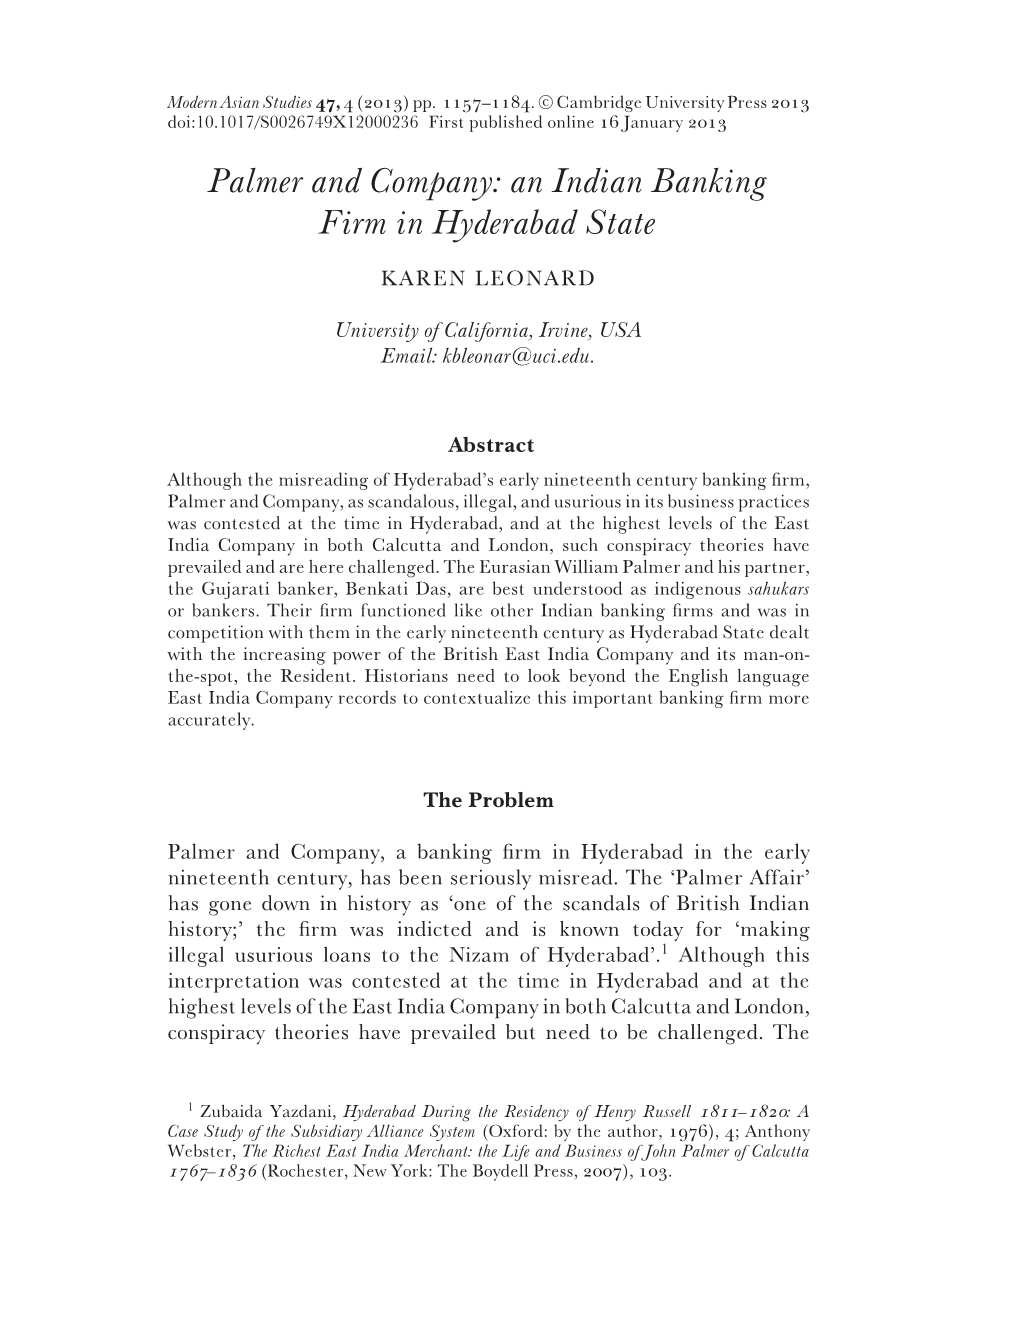 Palmer and Company: an Indian Banking Firm in Hyderabad State